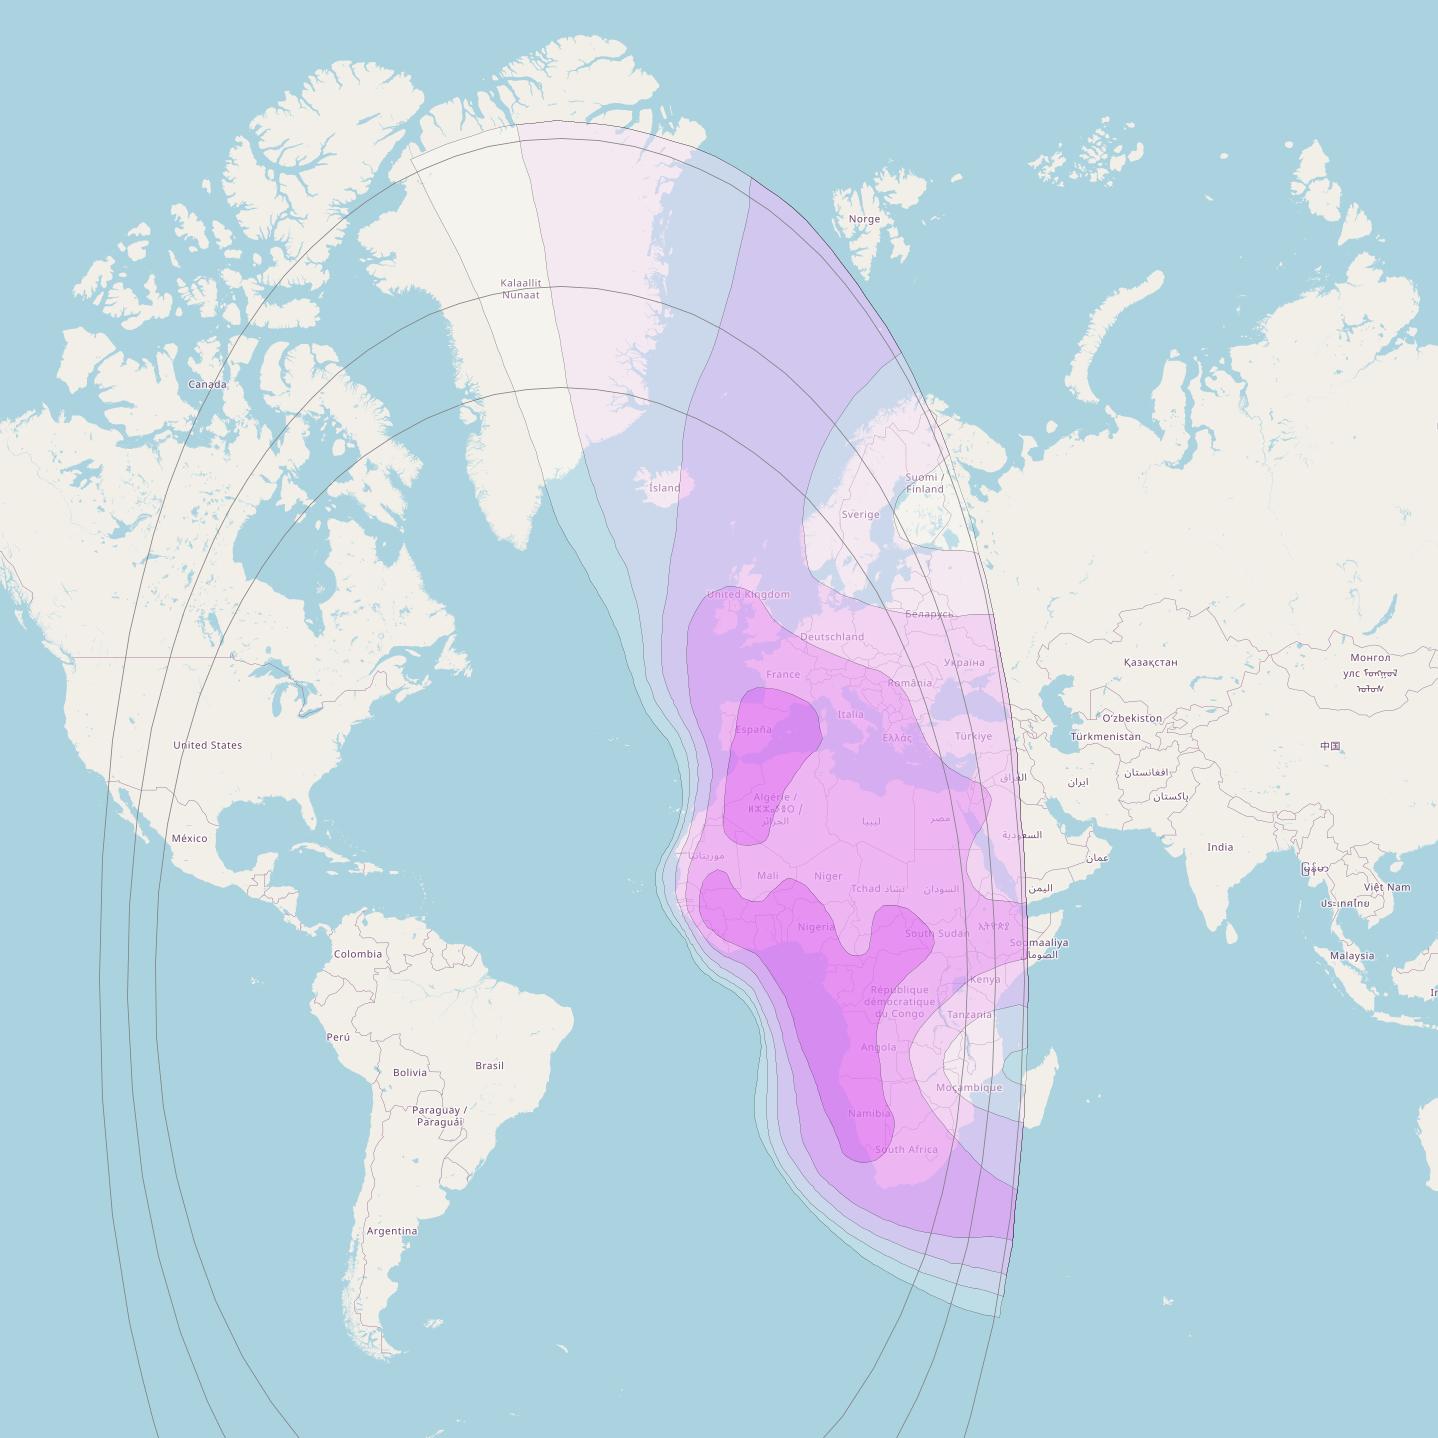 NSS 10 at 37° W downlink C-band Europe/Africa Beam coverage map